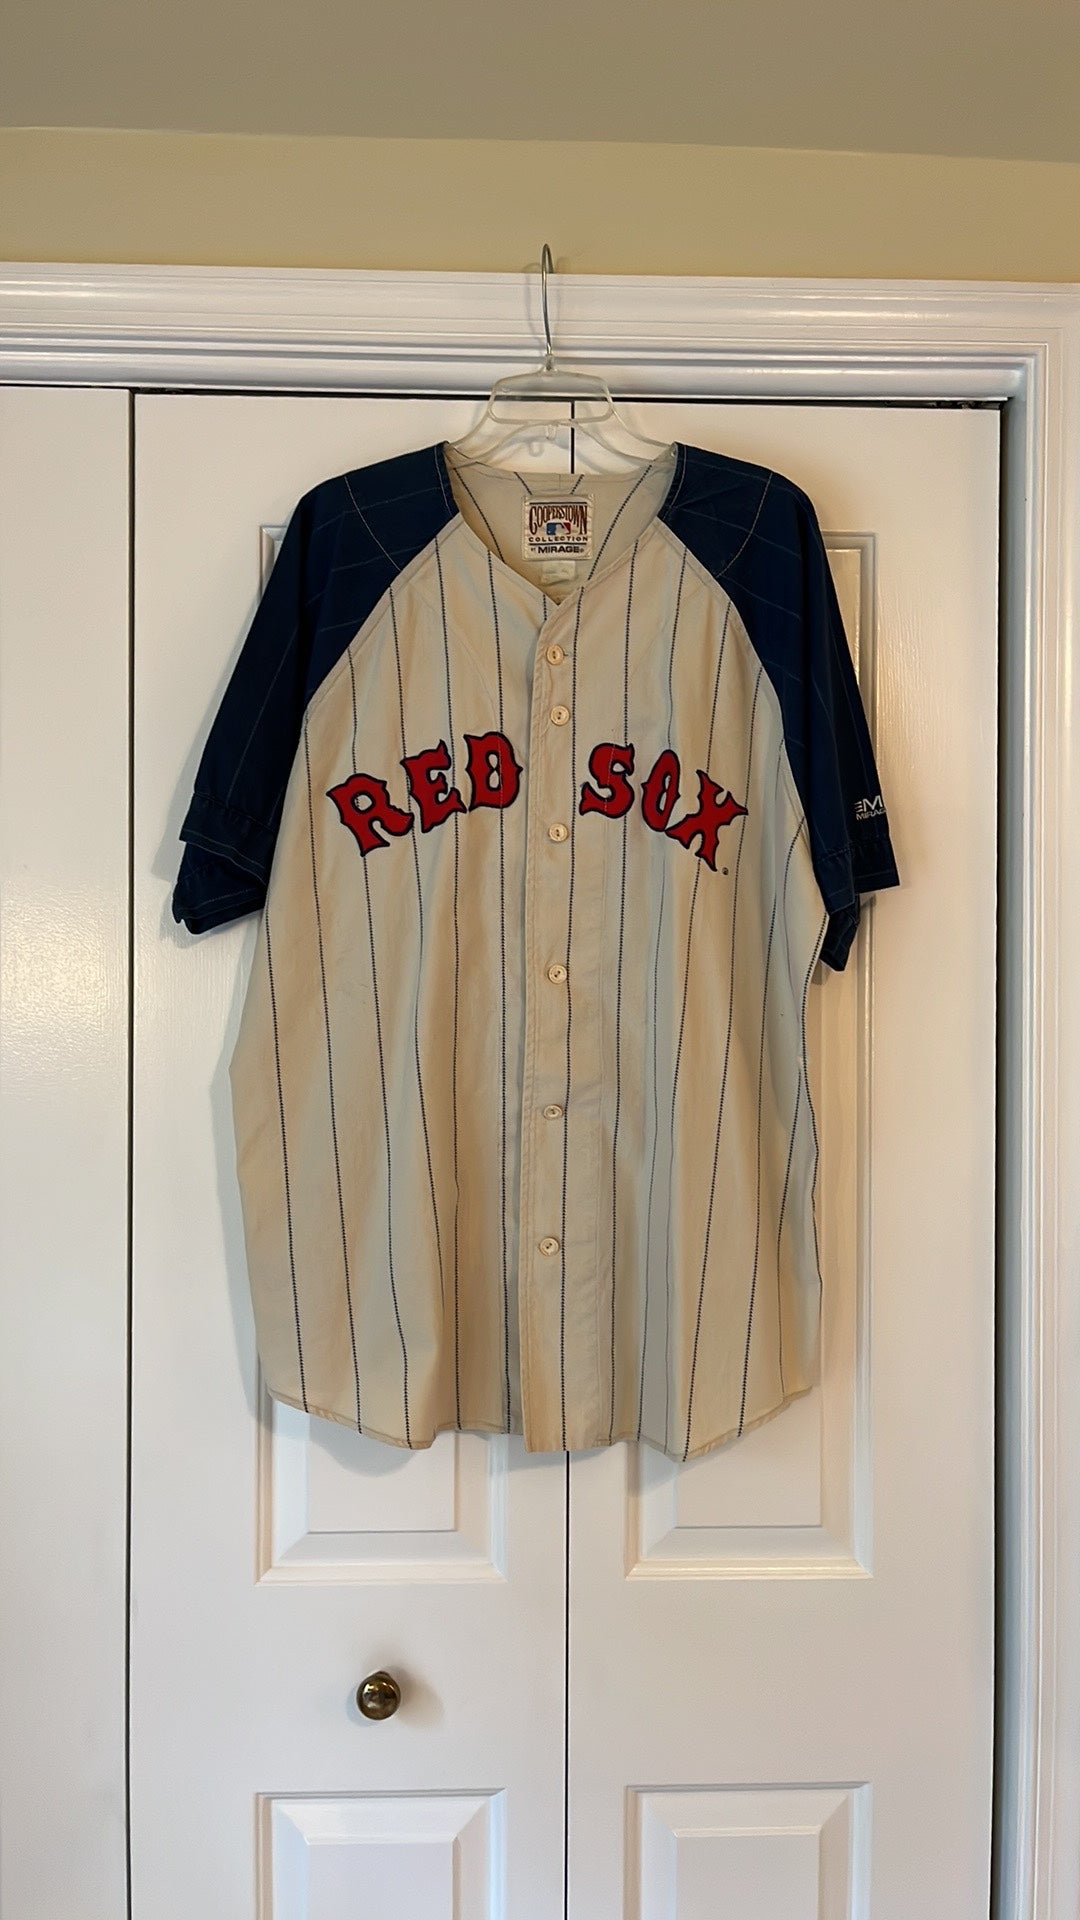 VTG Cooperstown Collection Ted Williams Red Sox jersey by Mirage